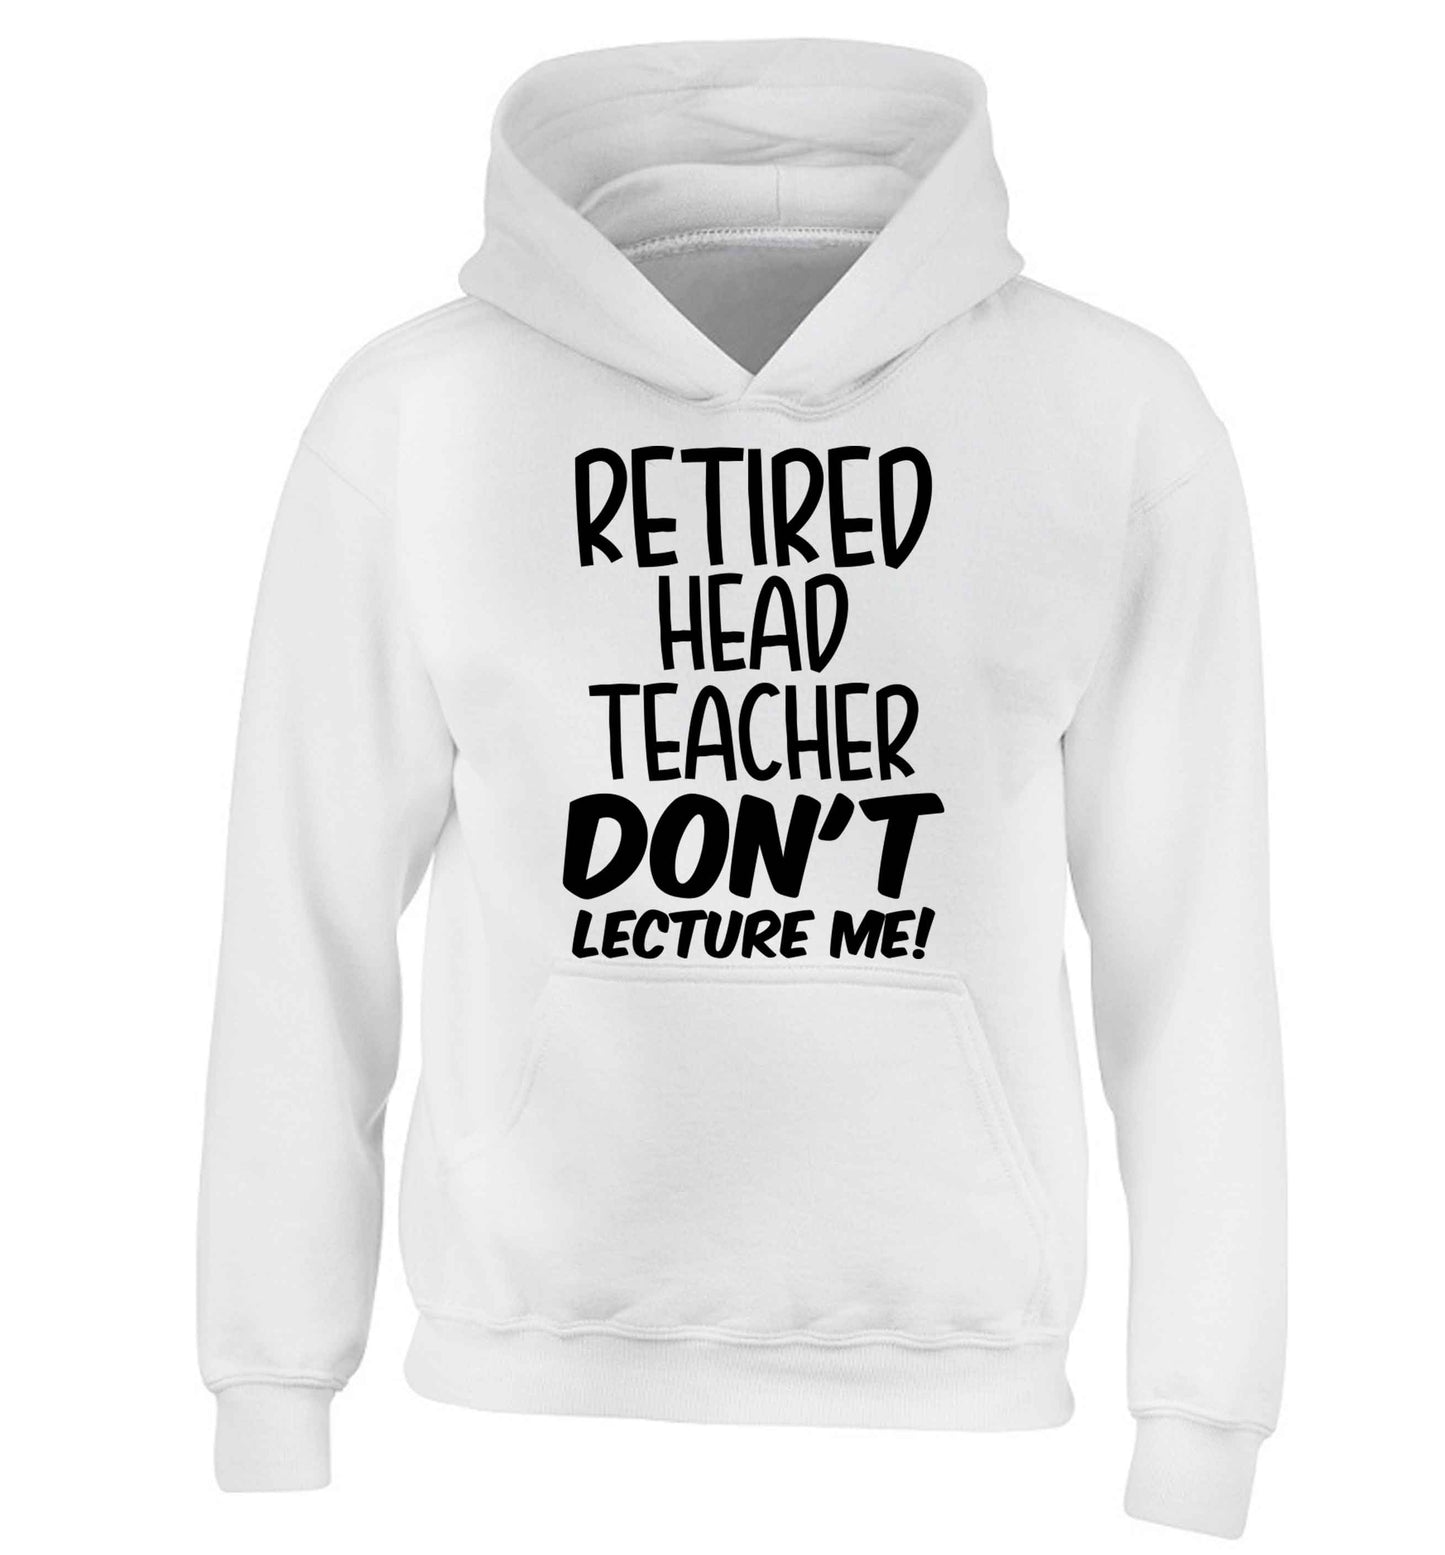 Retired head teacher don't lecture me! children's white hoodie 12-13 Years